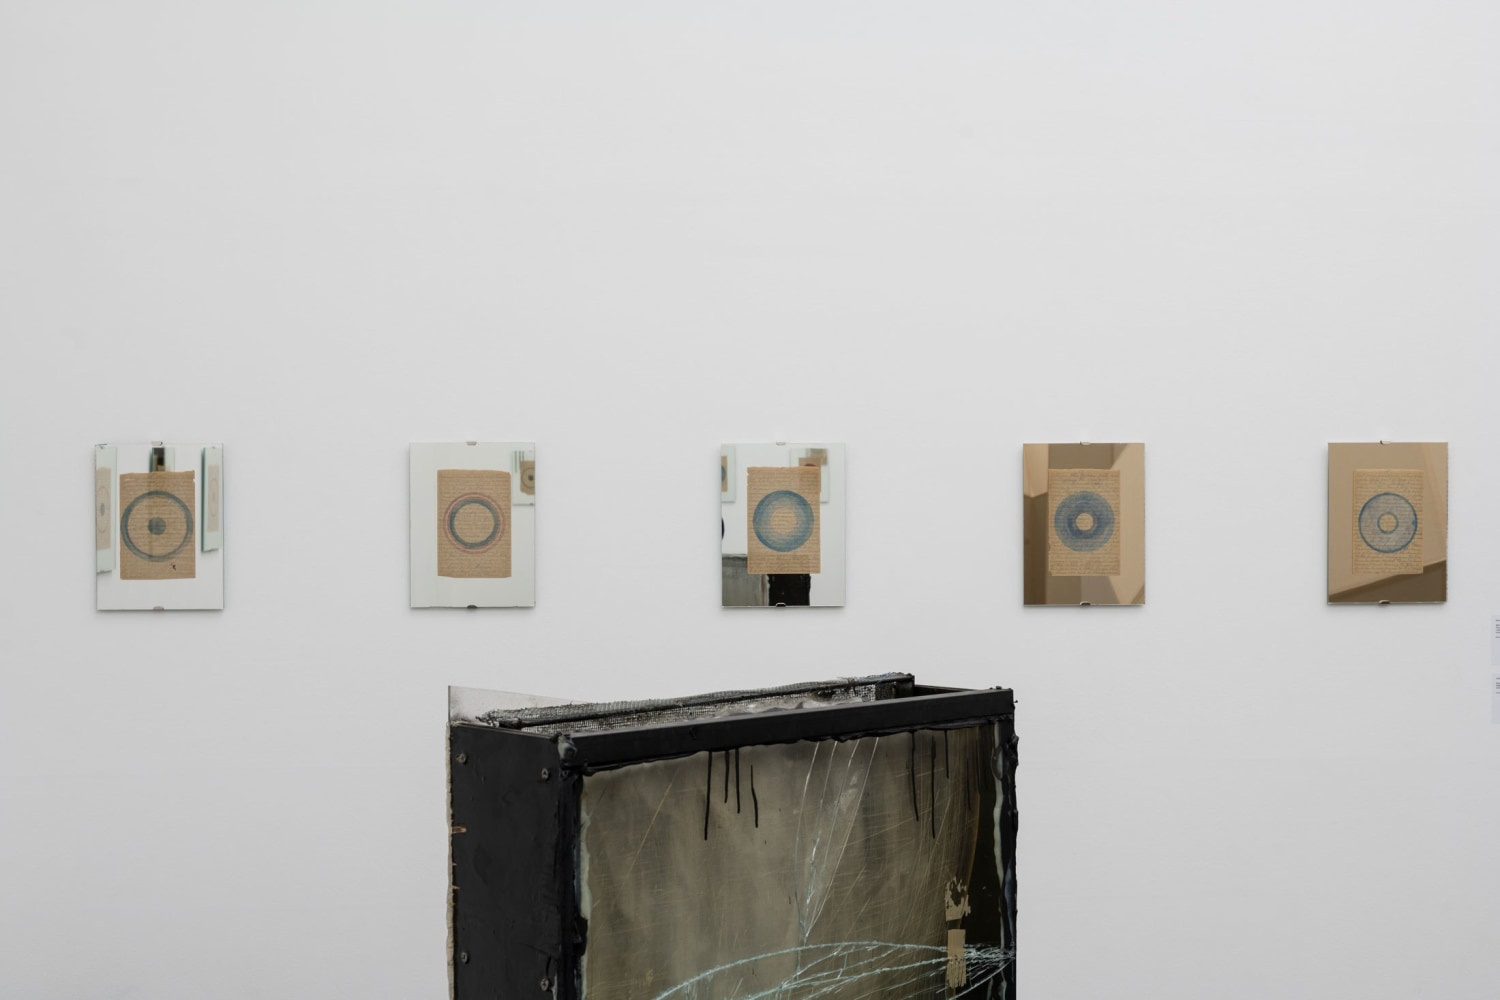 Oscar Tuazon
Owens Valley Water War, 2019
Watercolour paint and colour pencil on original letter sheets of mirror and glass metal brackets 40 panels
Installation view of Water School&amp;nbsp;at Bergen Kunsthall, Norway
January 27 &amp;ndash; April 9, 2023
Photo: Thor Br&amp;oslash;dreskift,&amp;nbsp;Courtesy of the artist and STANDARD (OSLO), Oslo